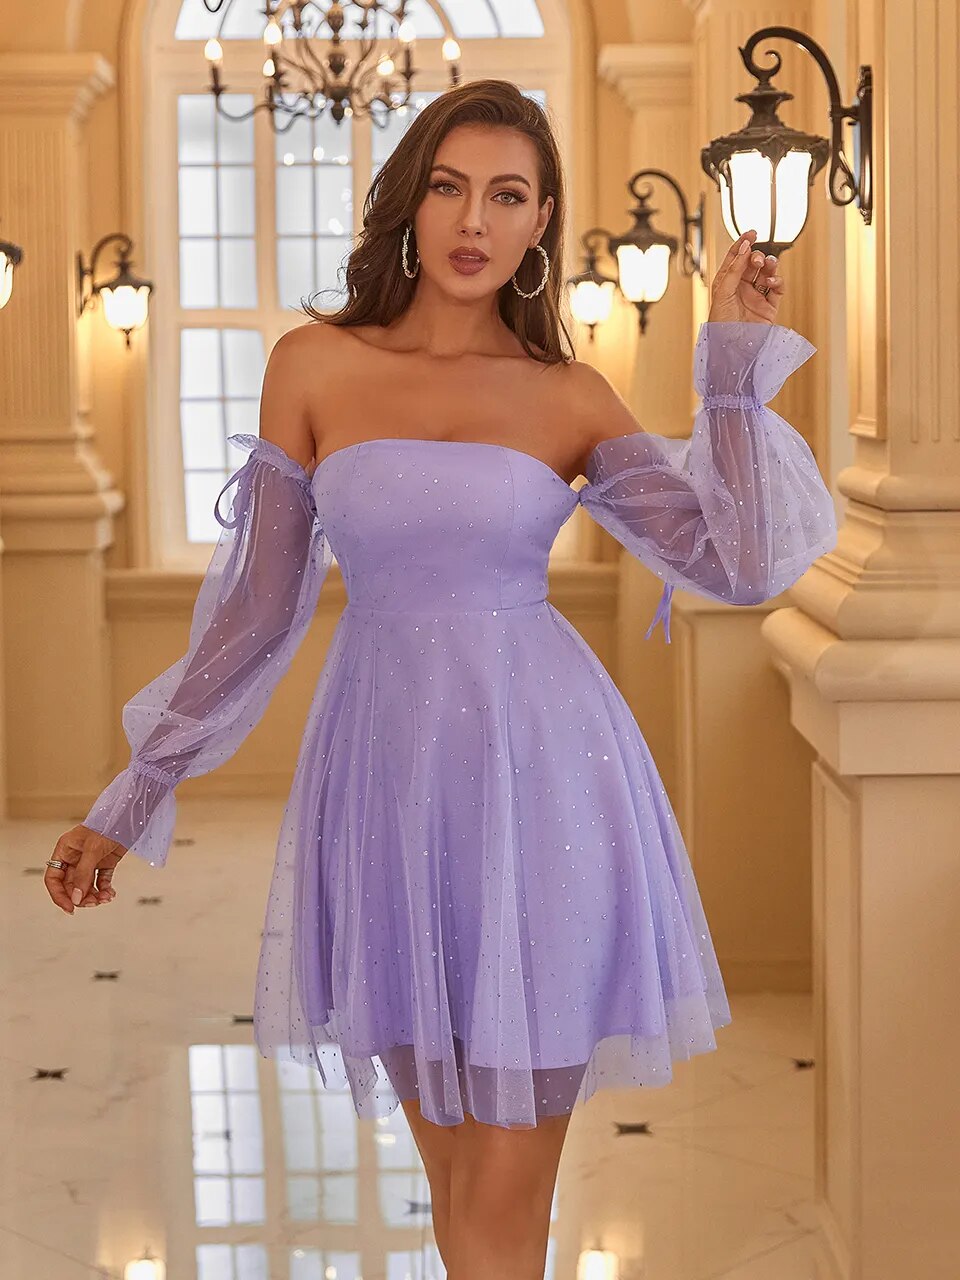 Women's Summer Chest-wrapped Off-shoulder Sweet Princess Dress aclosy